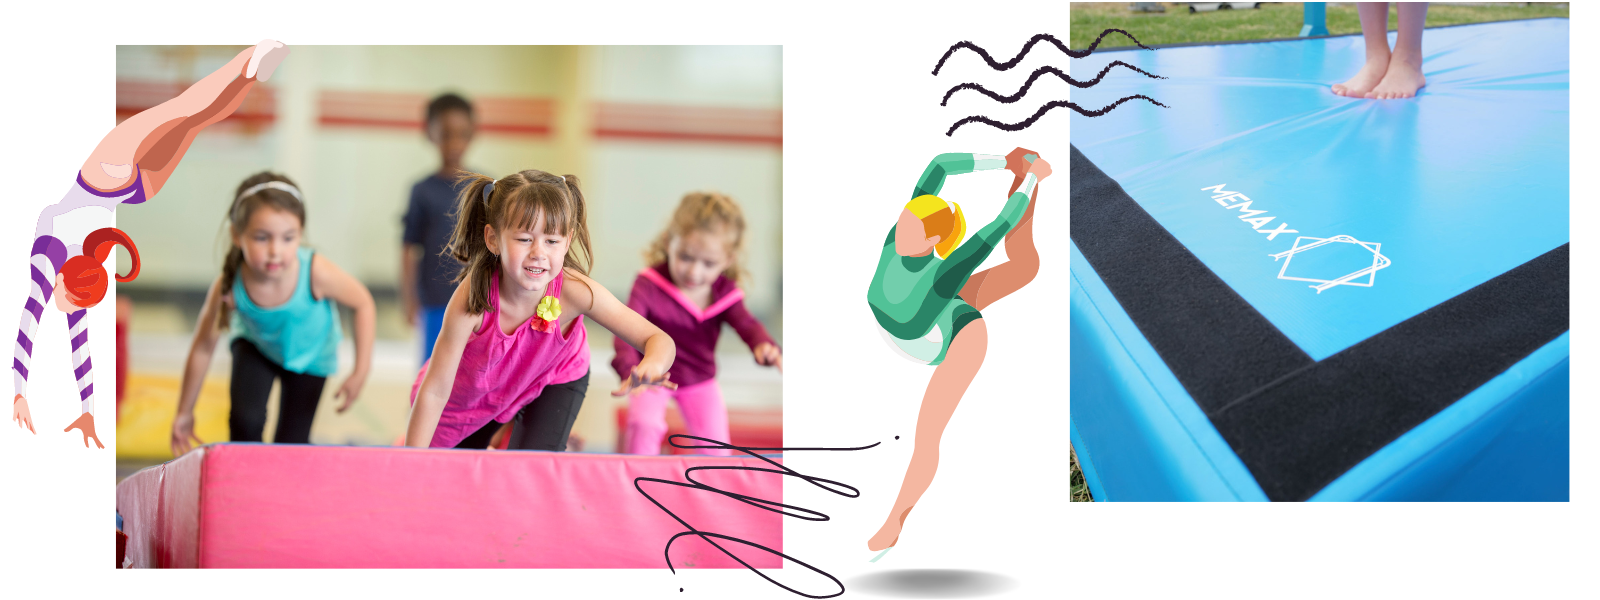 The Best Gymnastic Tumbling Mats For At-Home Use - Gym Plus